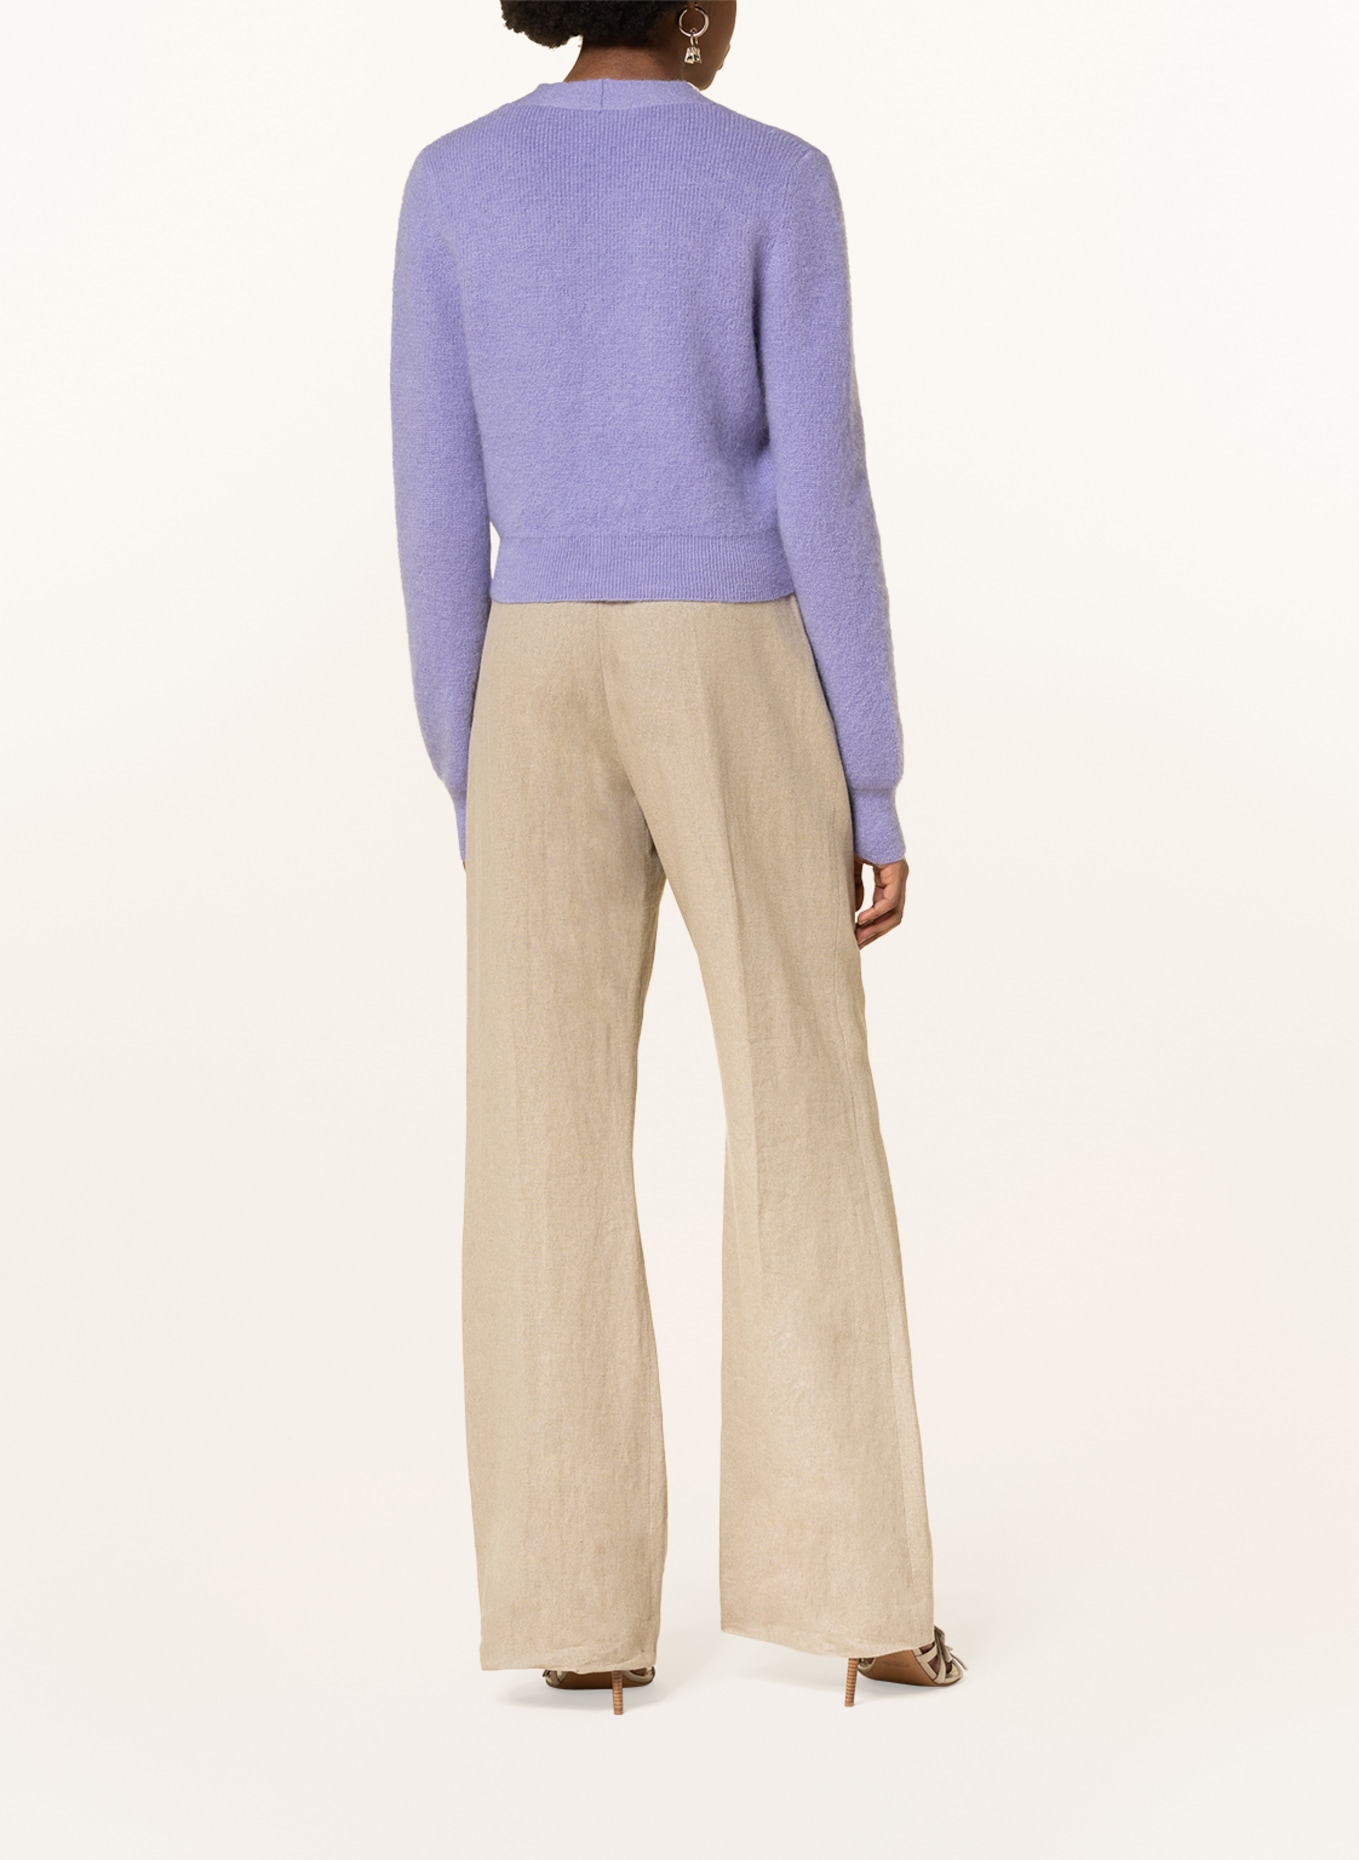 JACQUEMUS Cardigan LE CARDIGAN LAZO with mohair, Color: LIGHT PURPLE (Image 3)